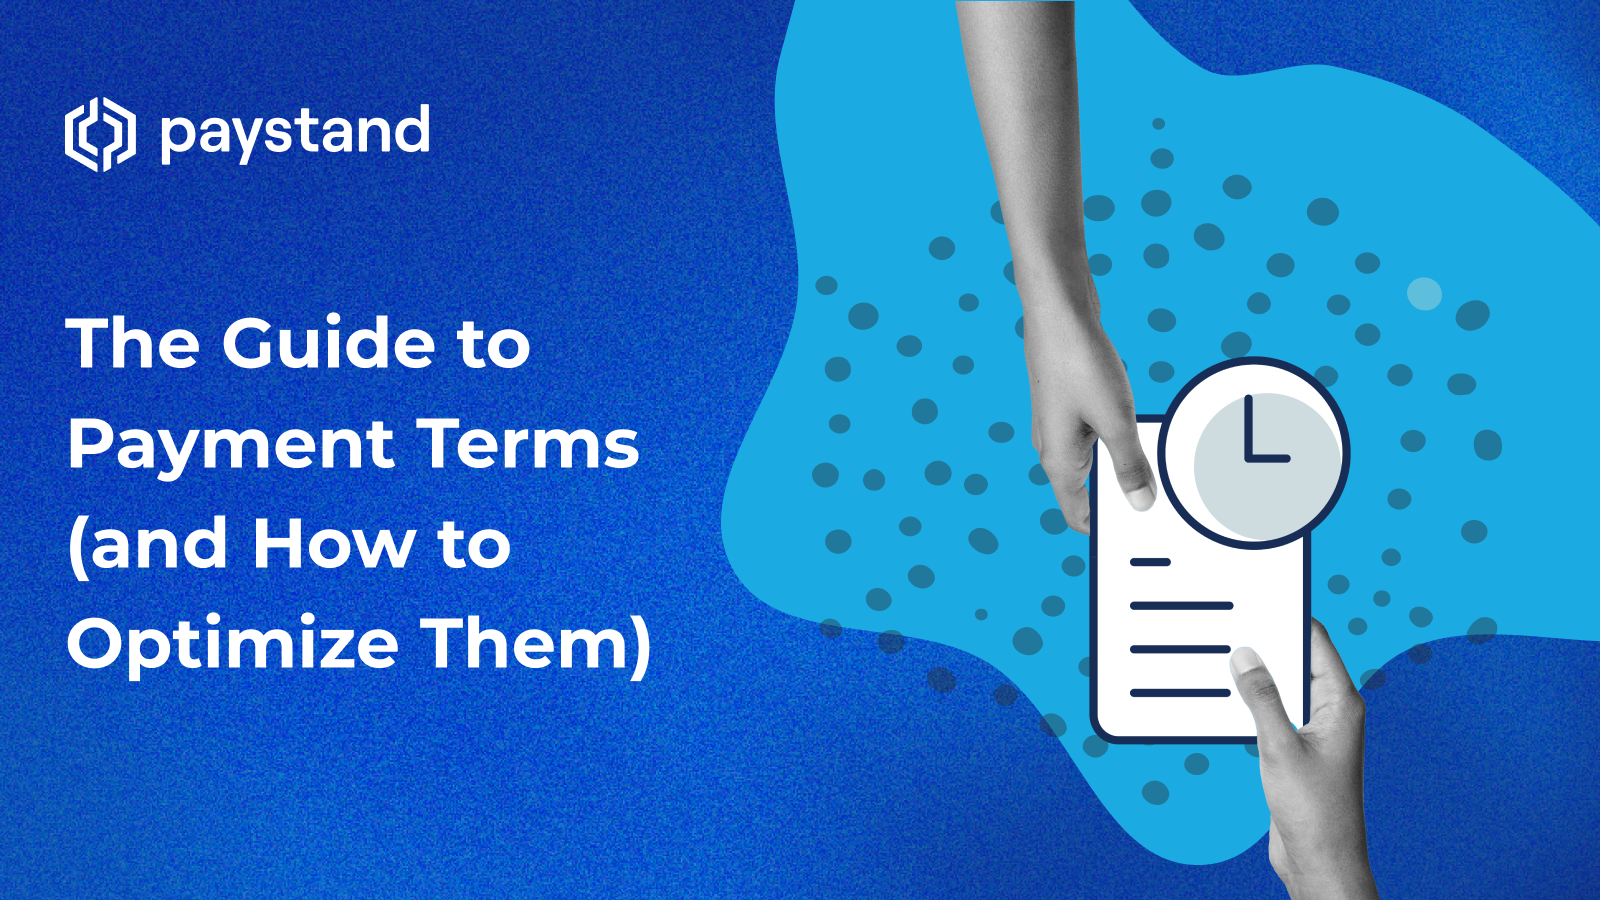 The Guide to Payment Terms and How to Optimize Them